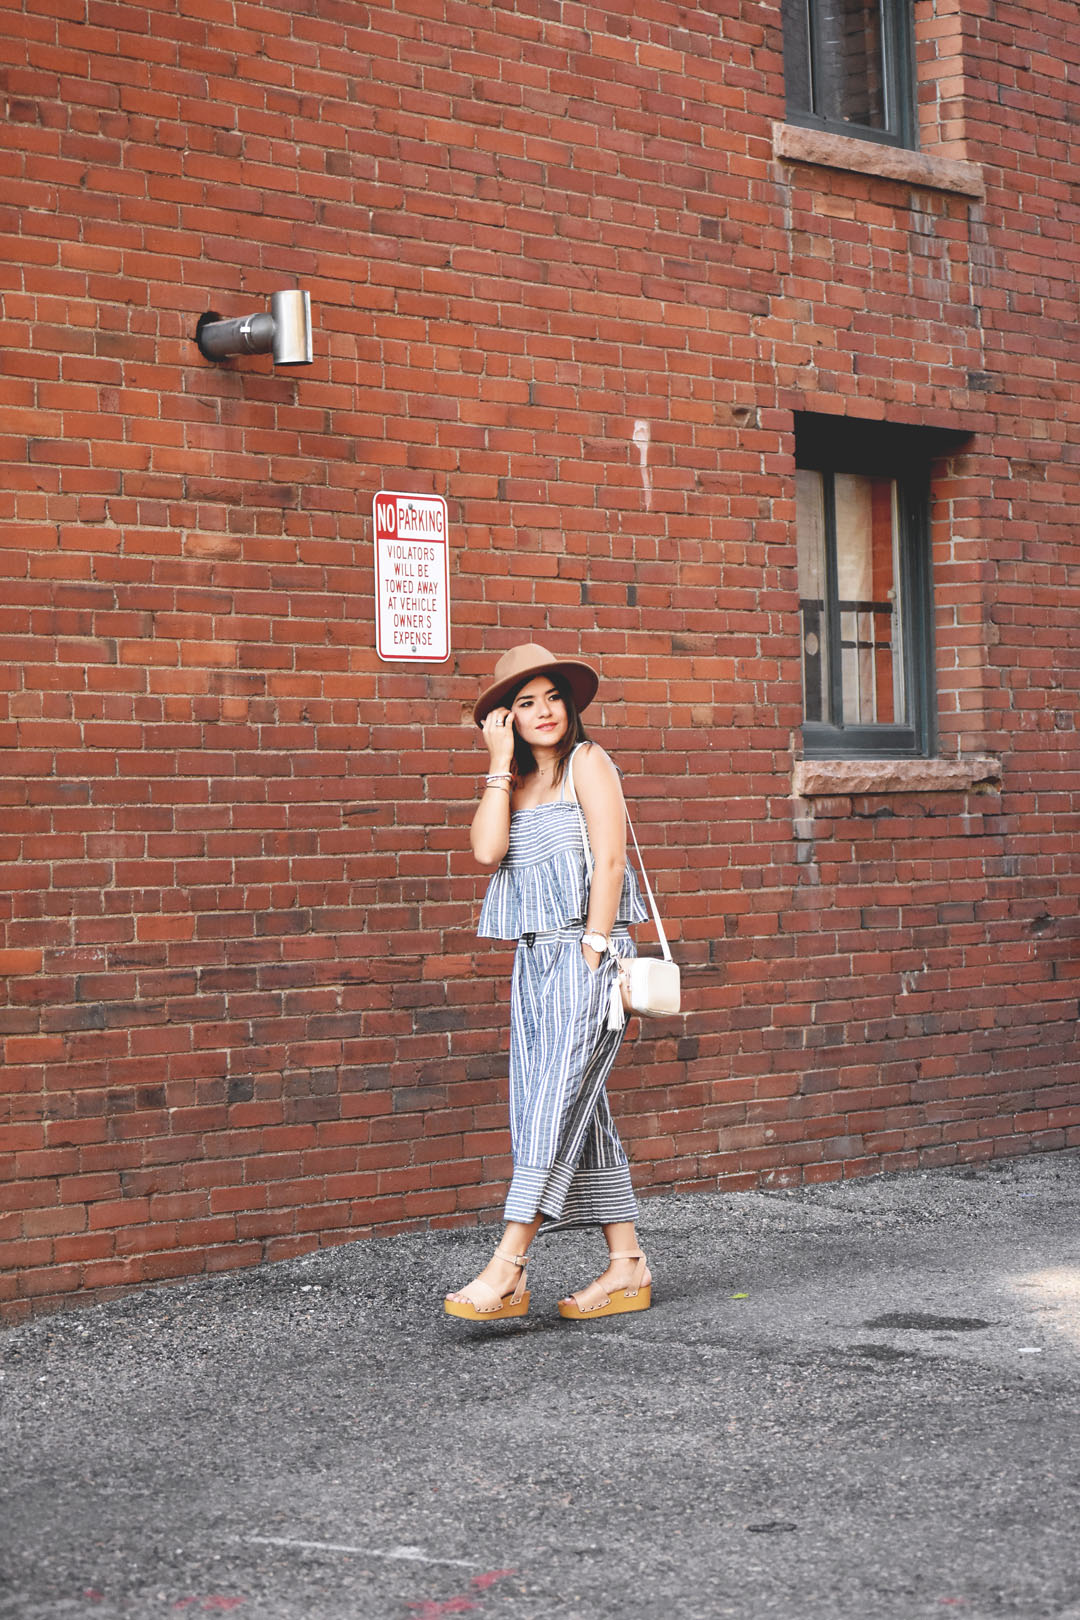 Carolina Hella of Chic Talk Fashion blog wearing a Chicwish set of striped top and pants, Forever 21 brown hat and Sam Edelman platforms